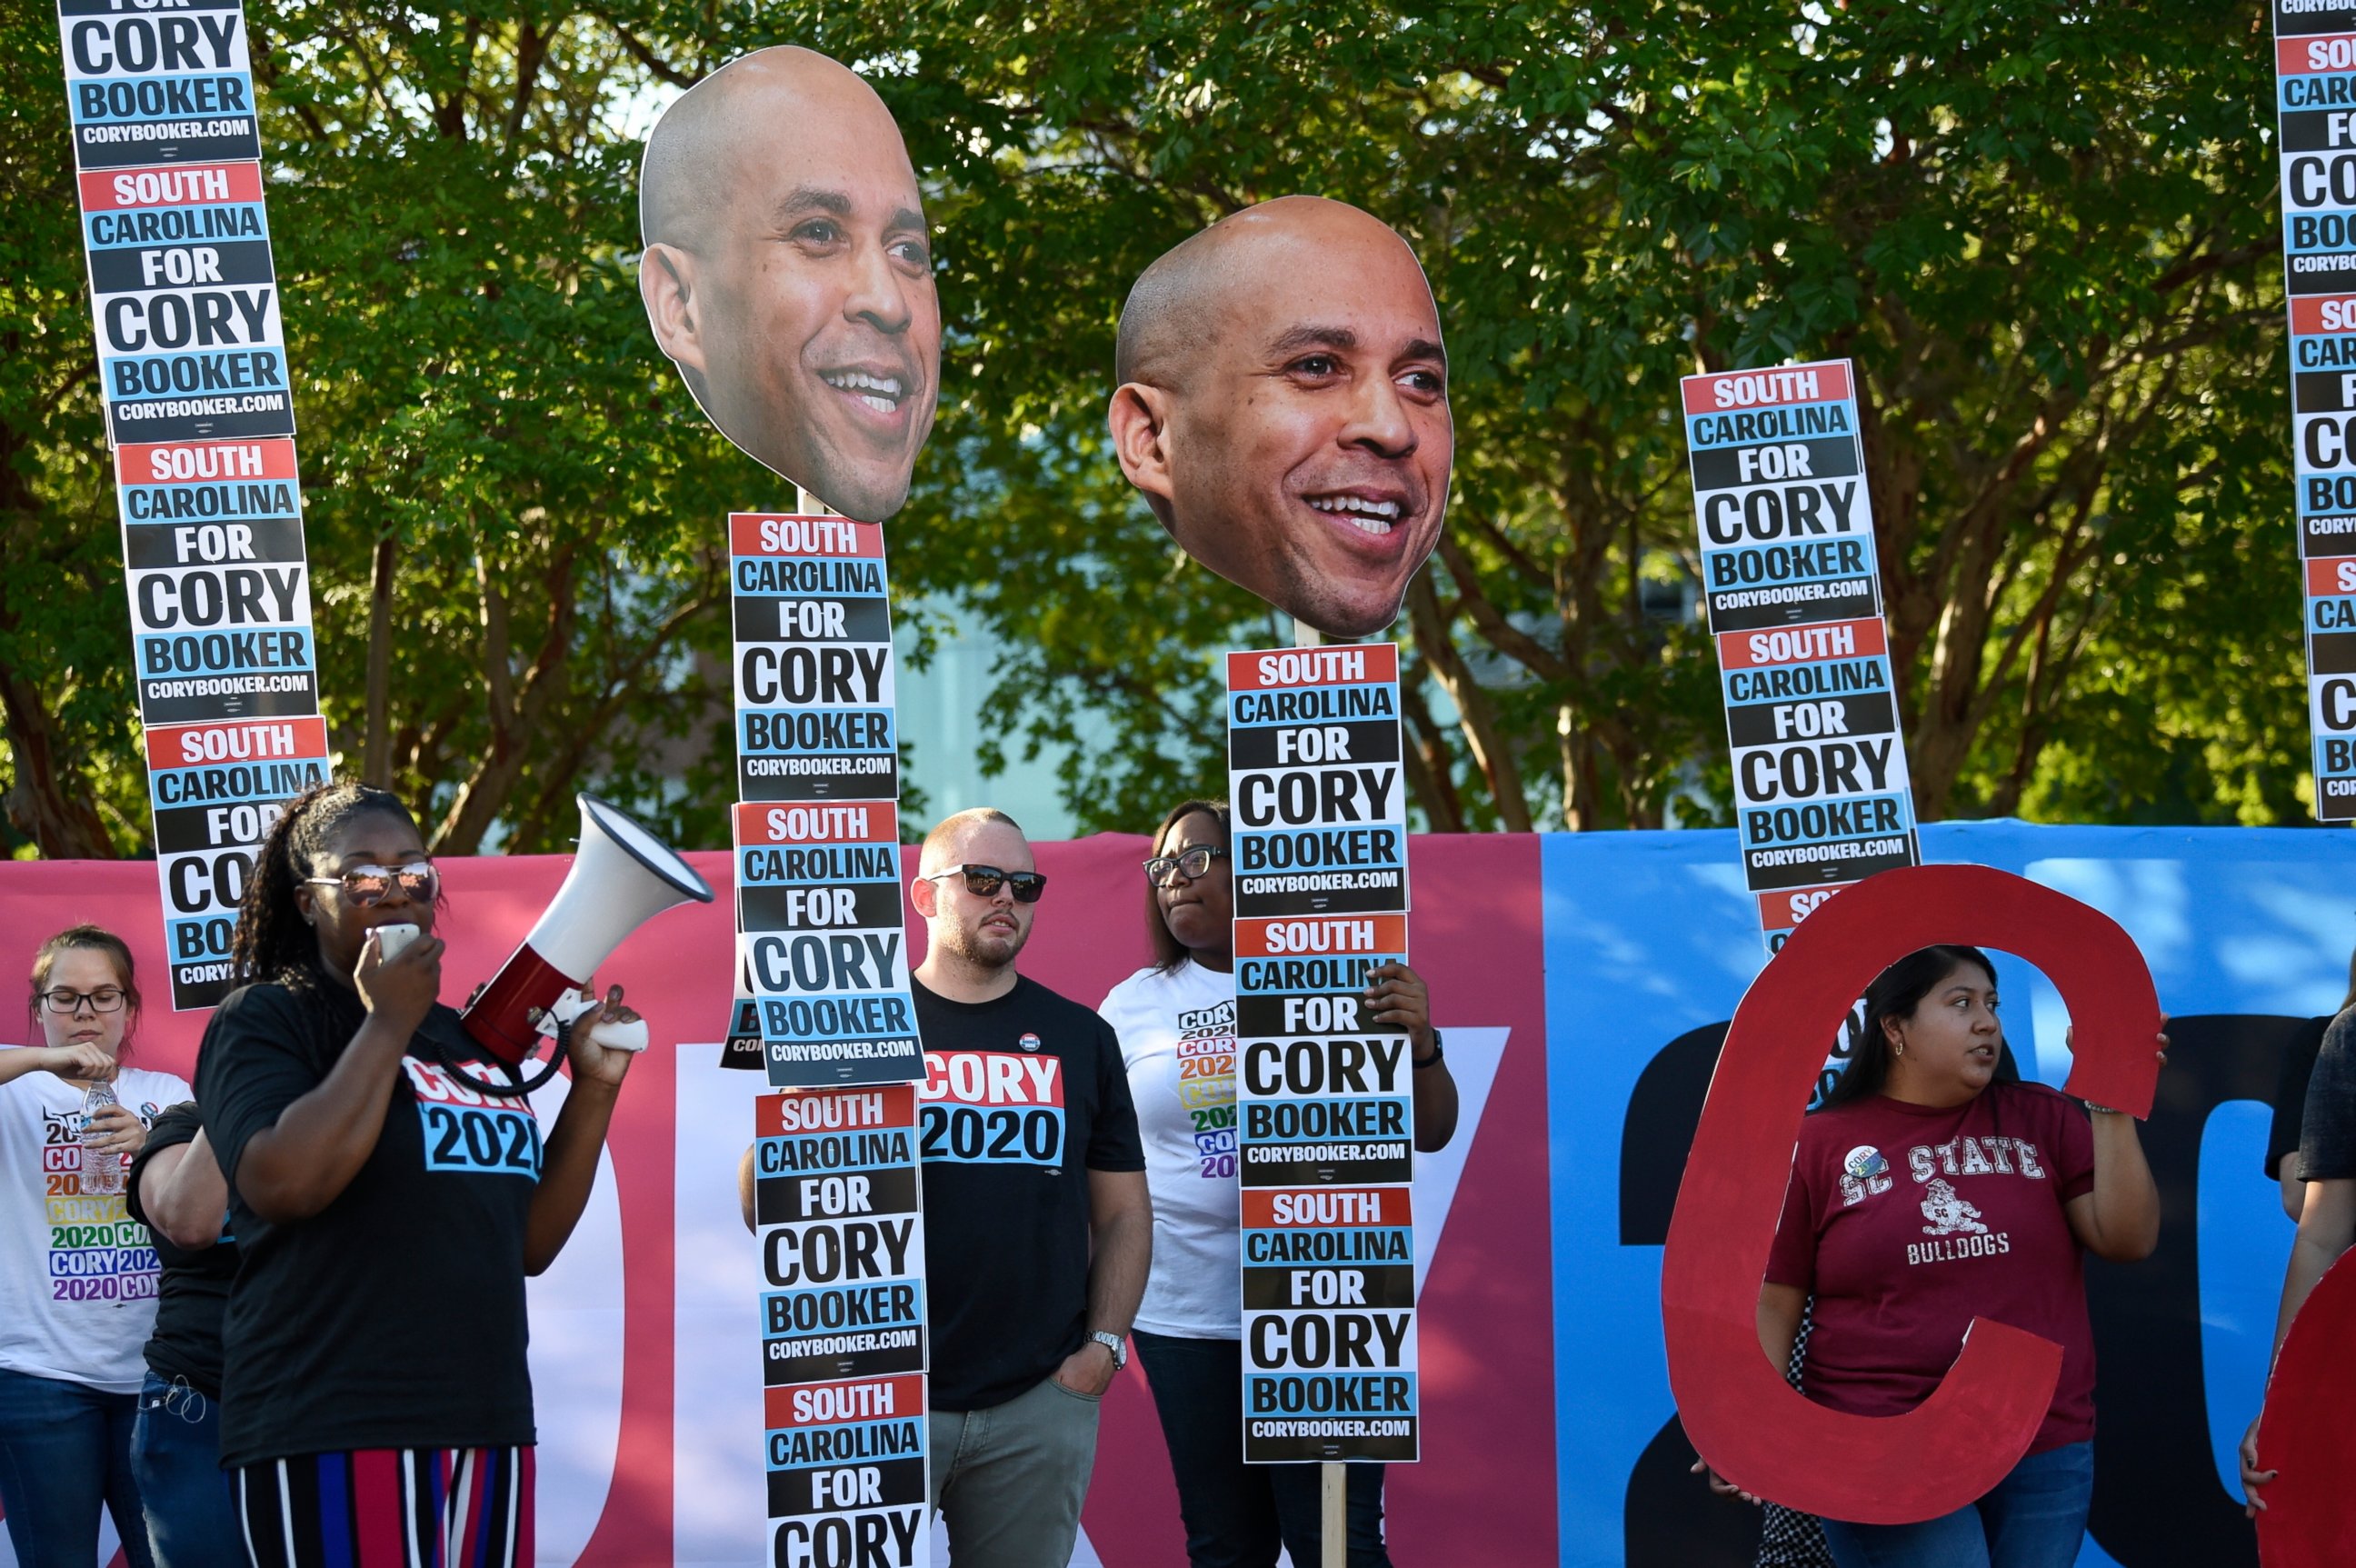 PHOTO: Supporters of New Jersey Sen. Cory Booker rally for the Democratic presidential hopeful ahead of Majority Whip Jim Clyburn's "World Famous Fish Fry" on Friday, June 21, 2019, in Columbia, S.C.